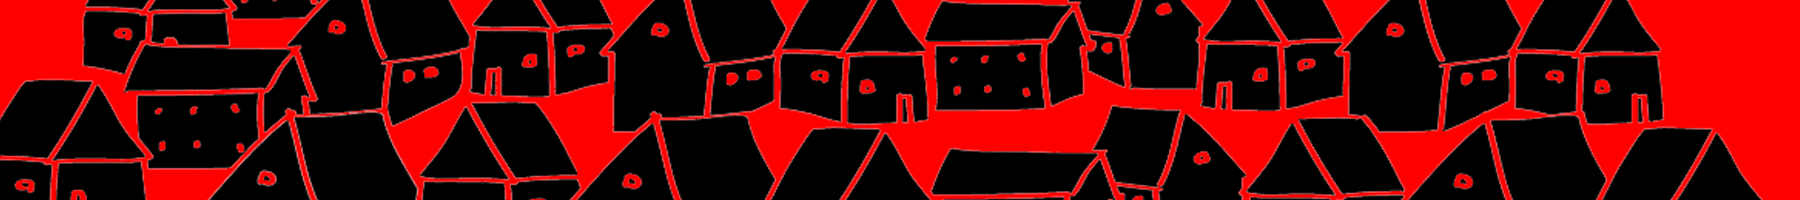 Big black houses drawn on a red background